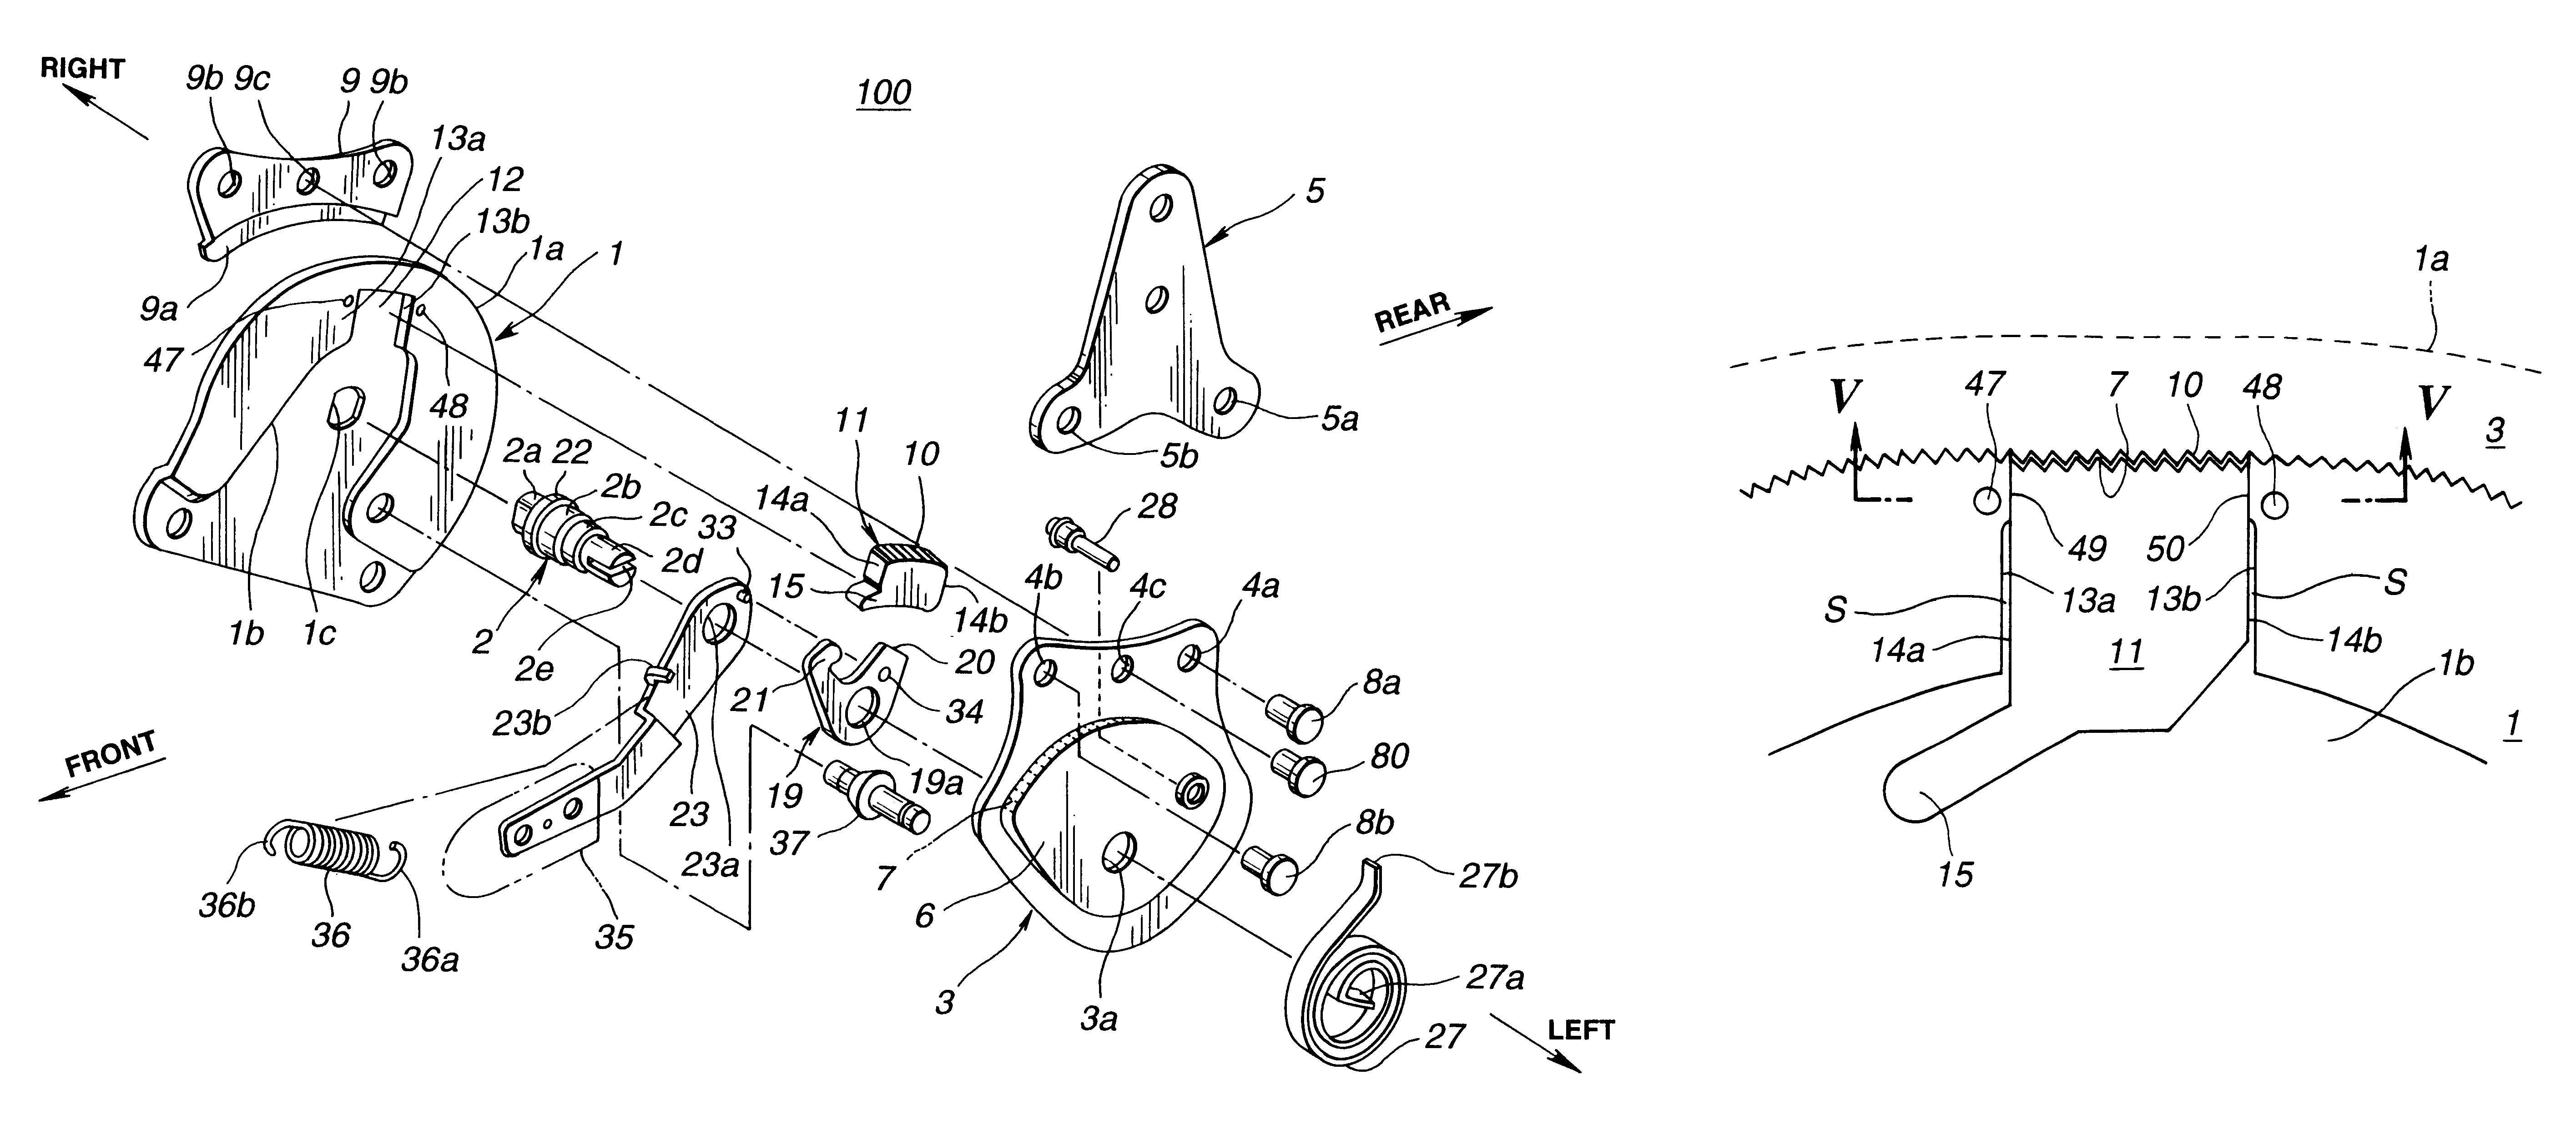 Seat reclining device